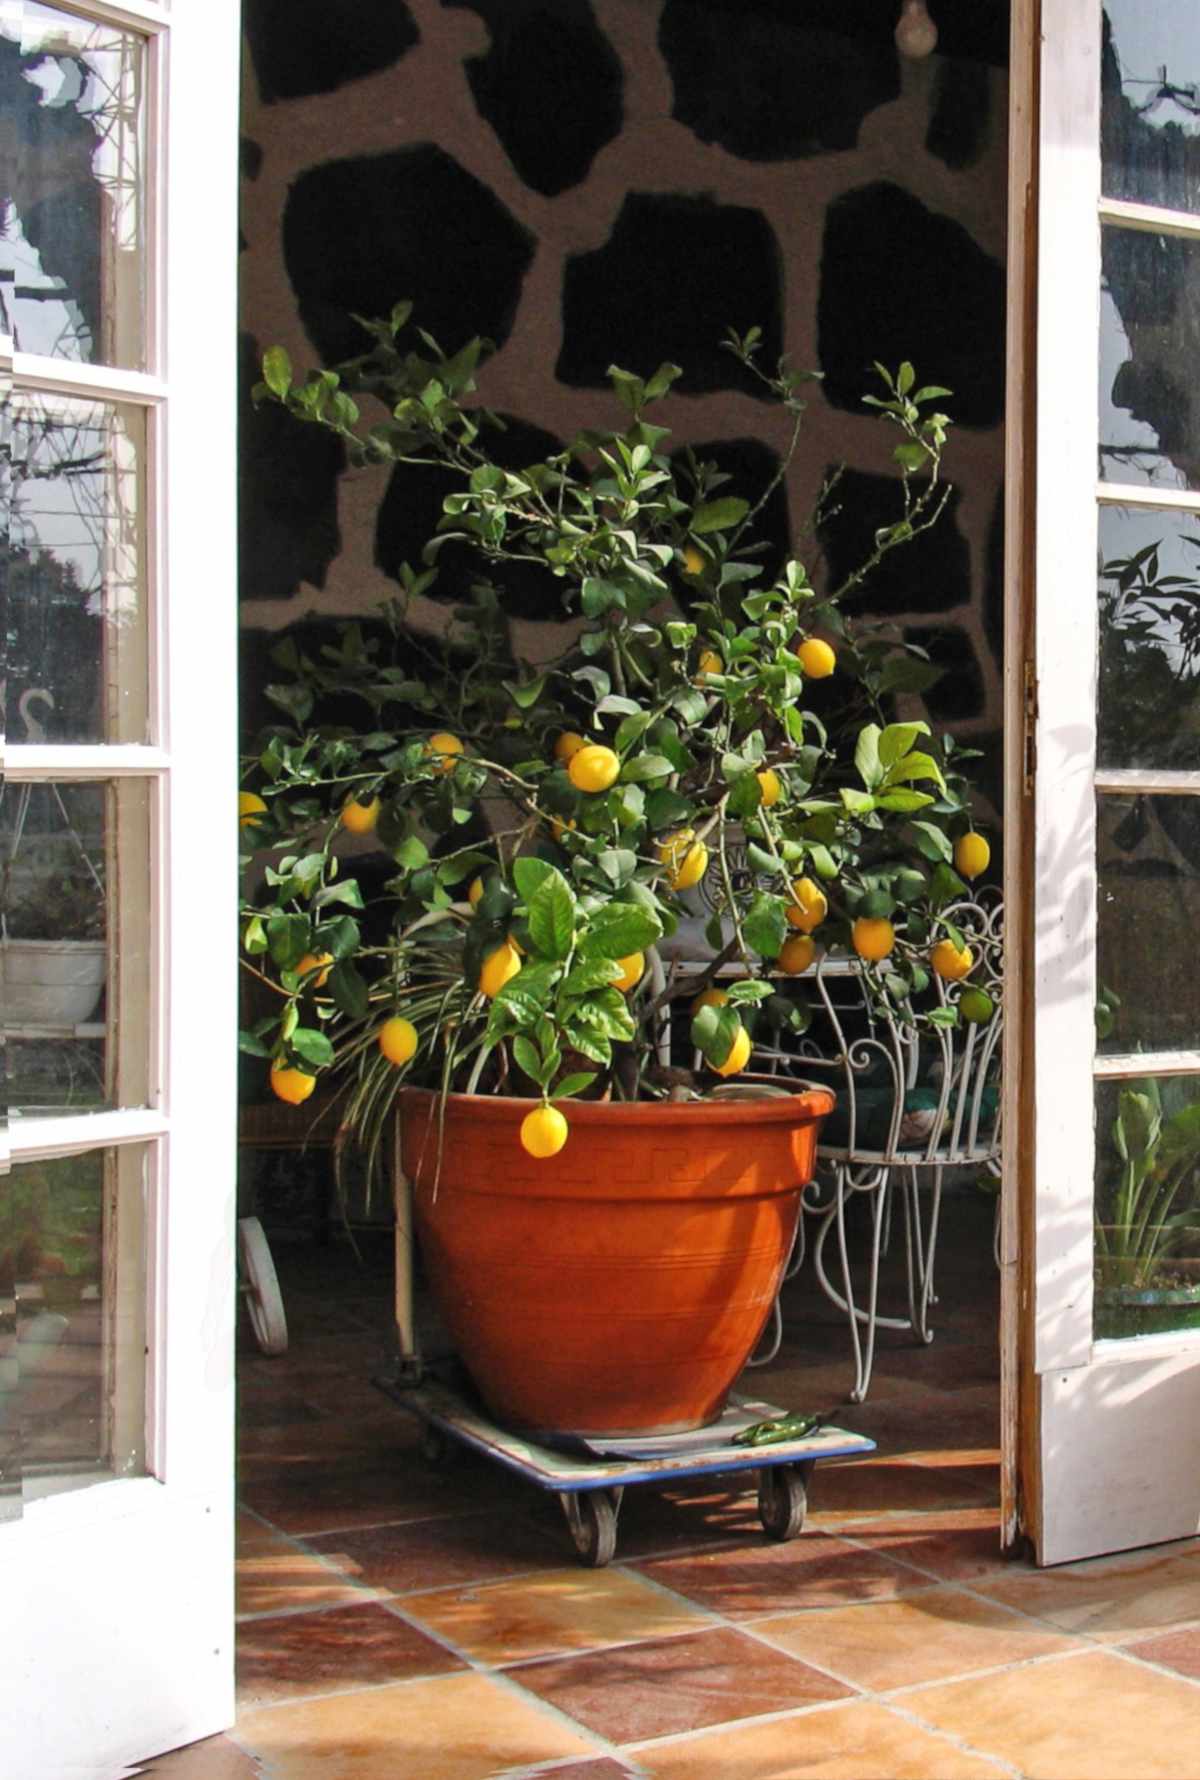 A potted lemon tree with fruits being wheeled out into the sun.